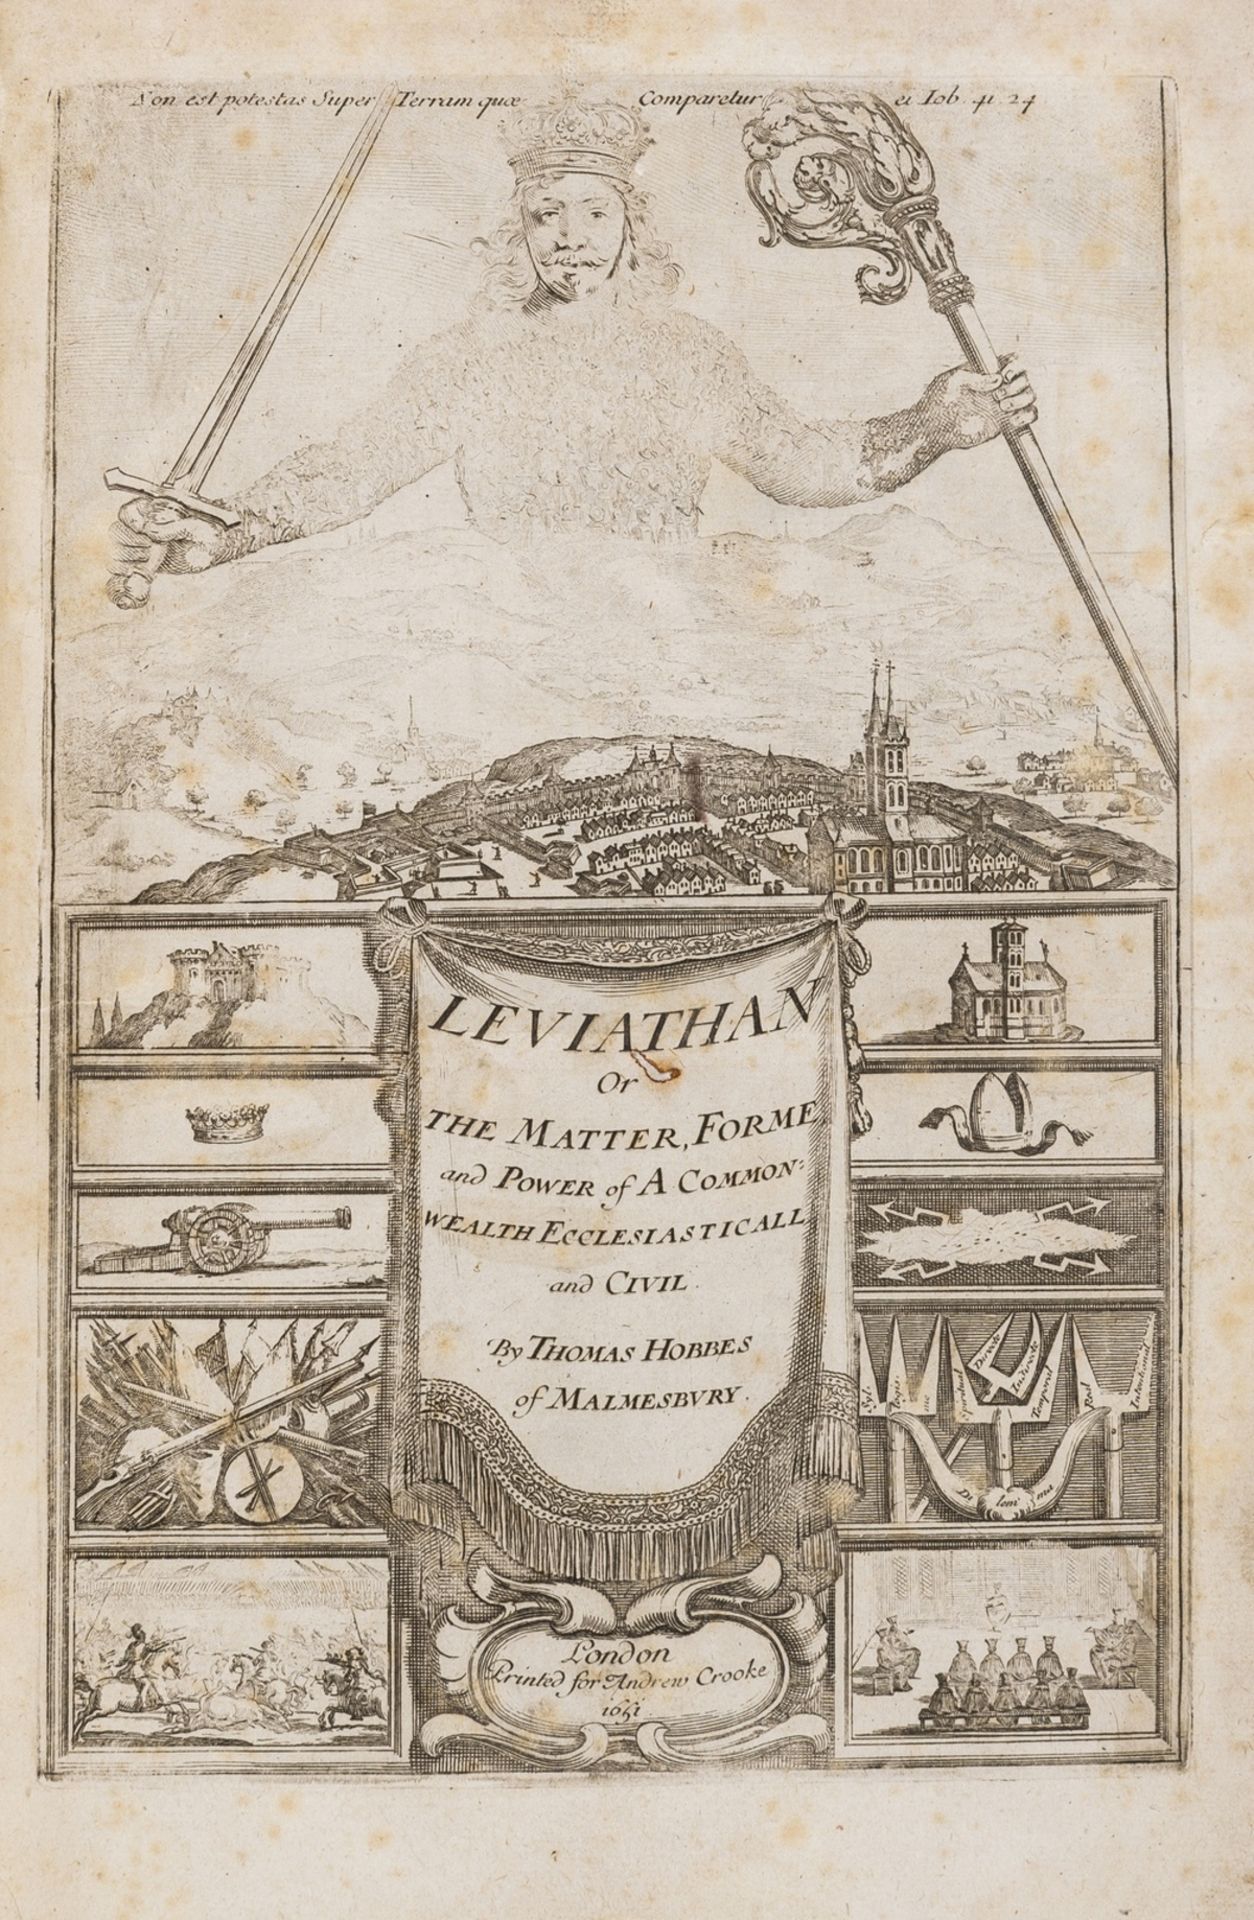 Hobbes (Thomas) Leviathan, second edition, Printed for Andrew Ckooke, 1651 [ie 1678].